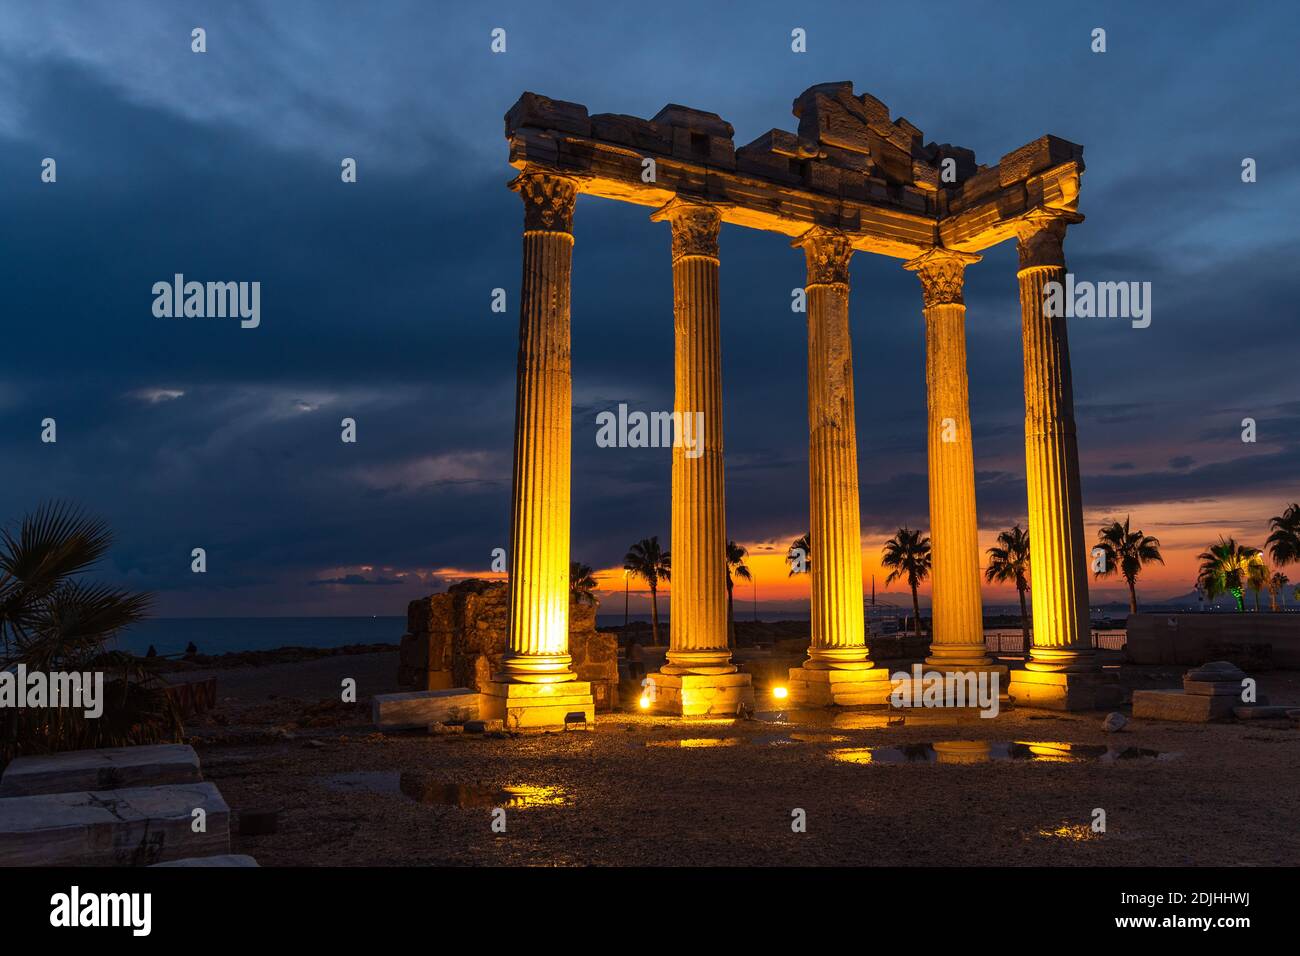 Temple of Apollo at sunset, Greek ancient historical antique marble columns in Side Antalya Turkey Stock Photo